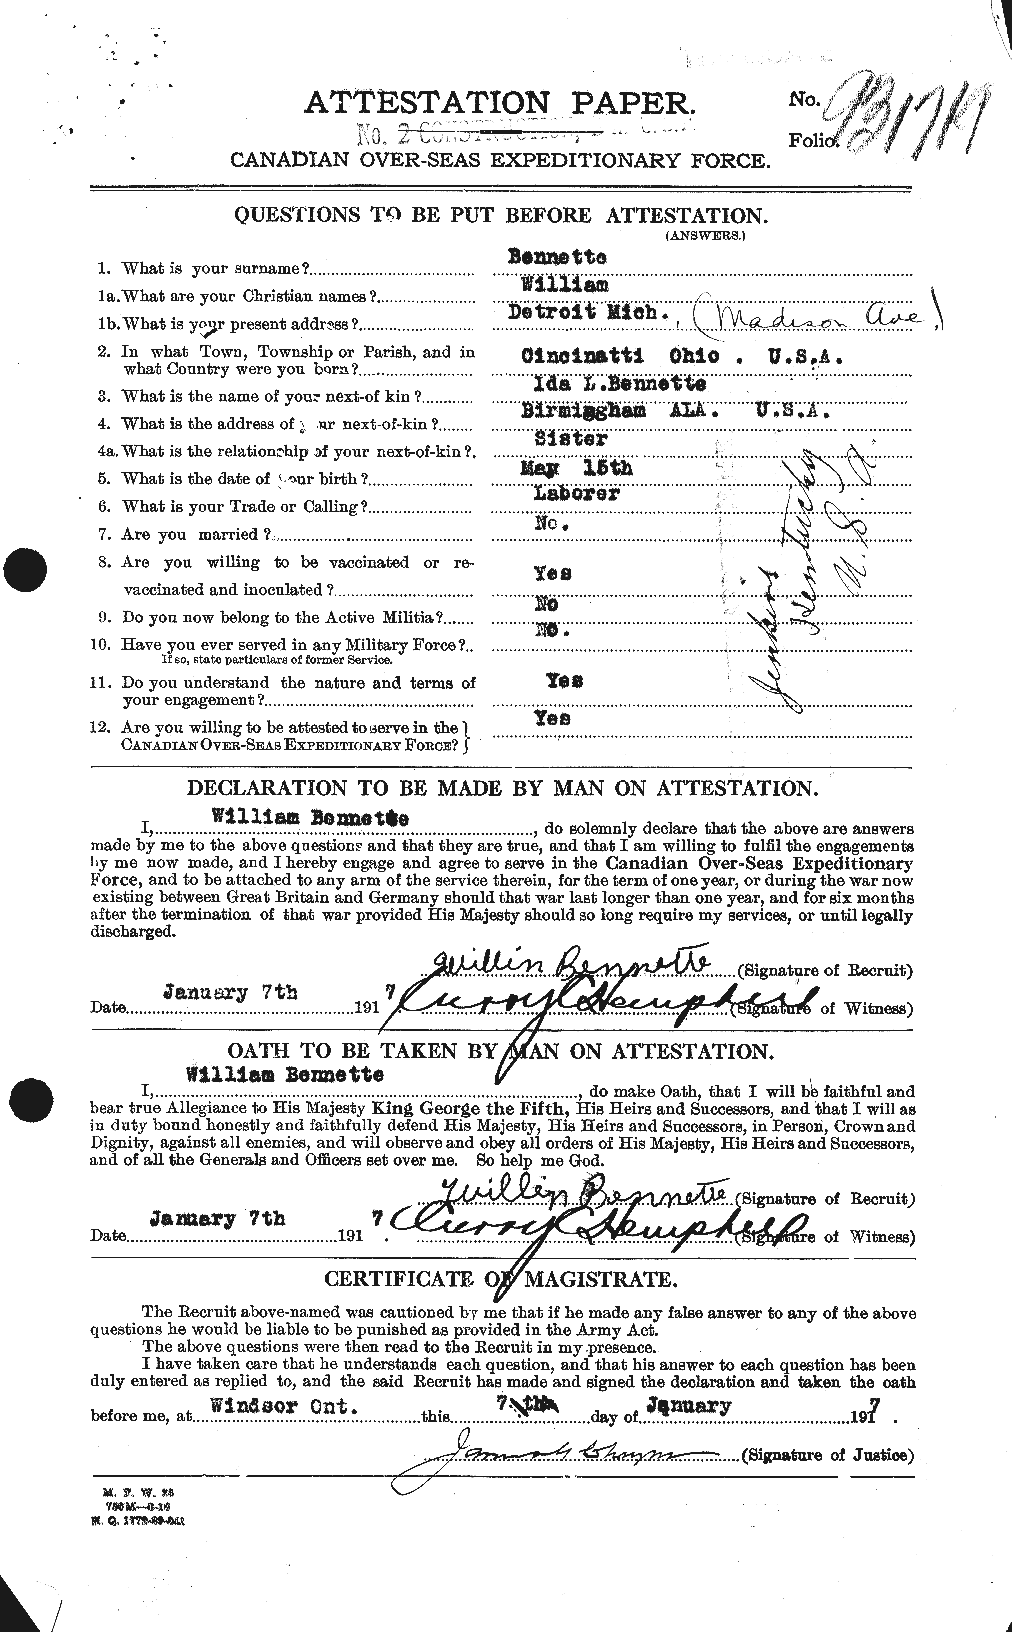 Personnel Records of the First World War - CEF 236583a